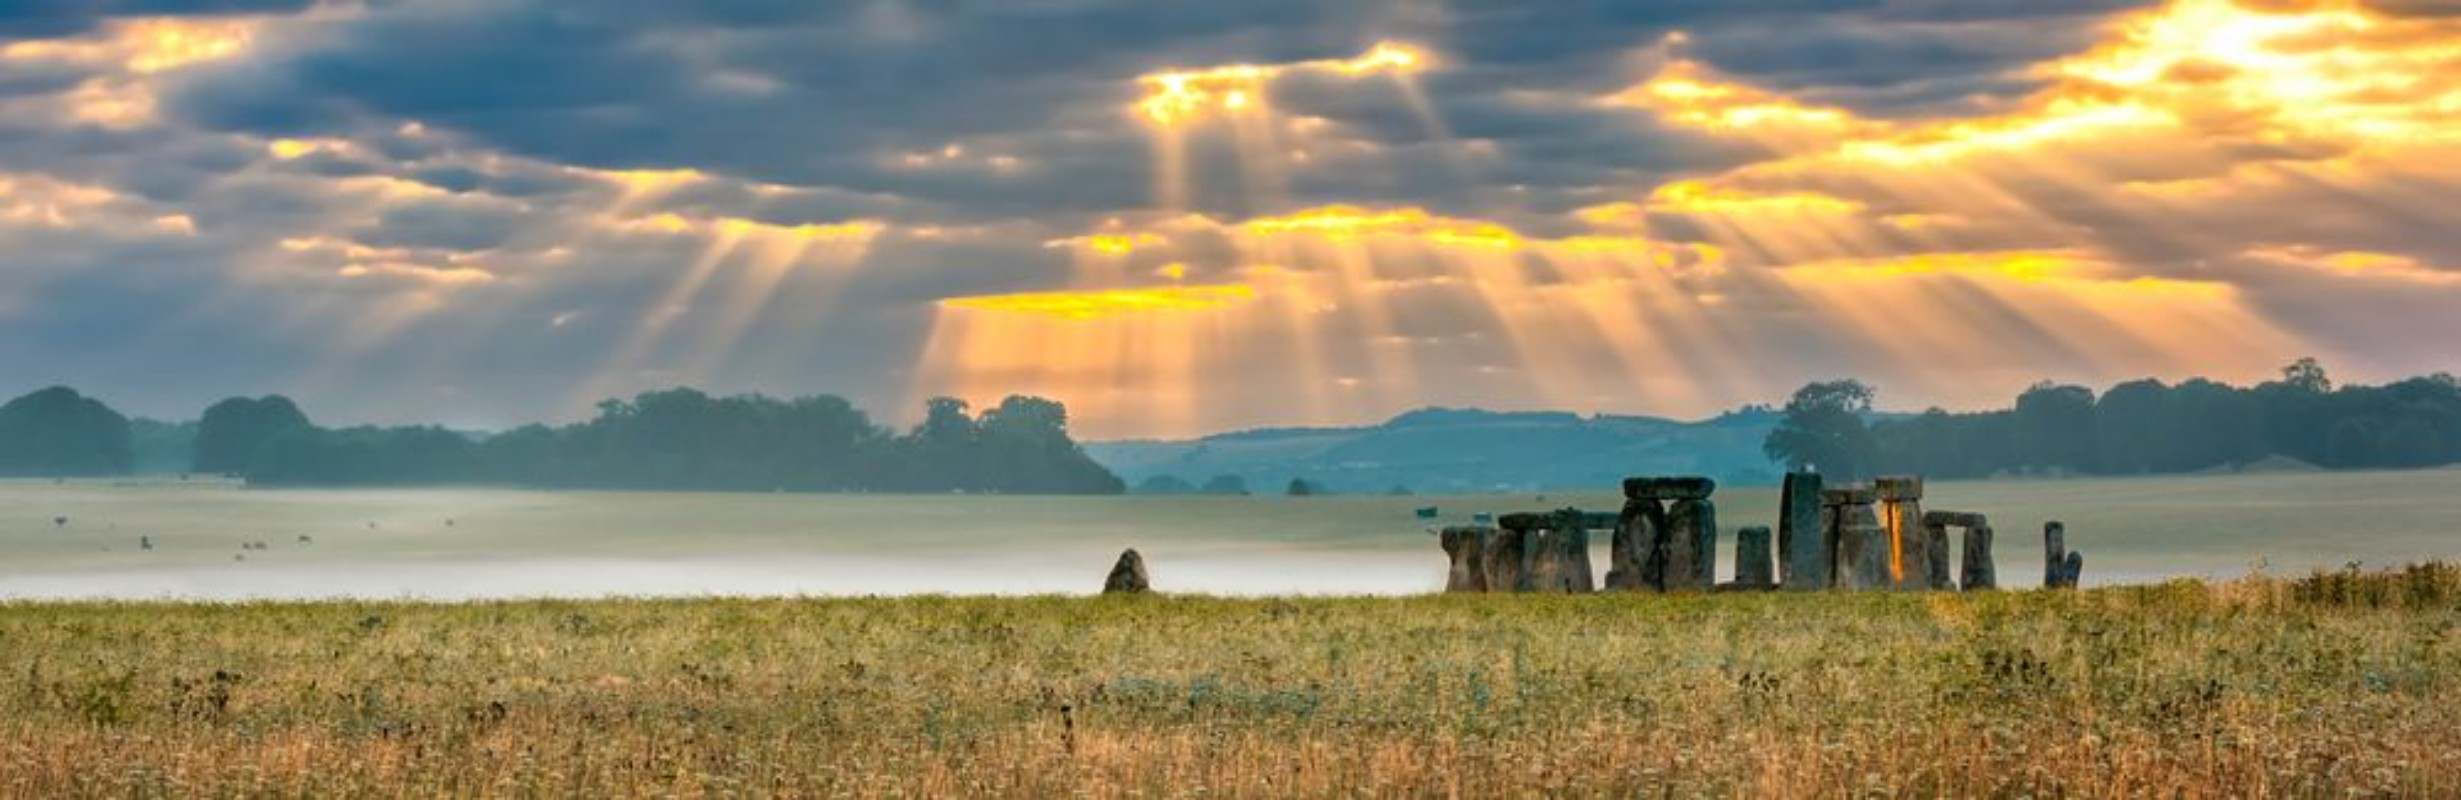 Image de Amesbury Wiltshire United Kingdom - August 14 2016 Cloudy sunrise over Stonehenge - prehistoric megalith monument arranged in circle